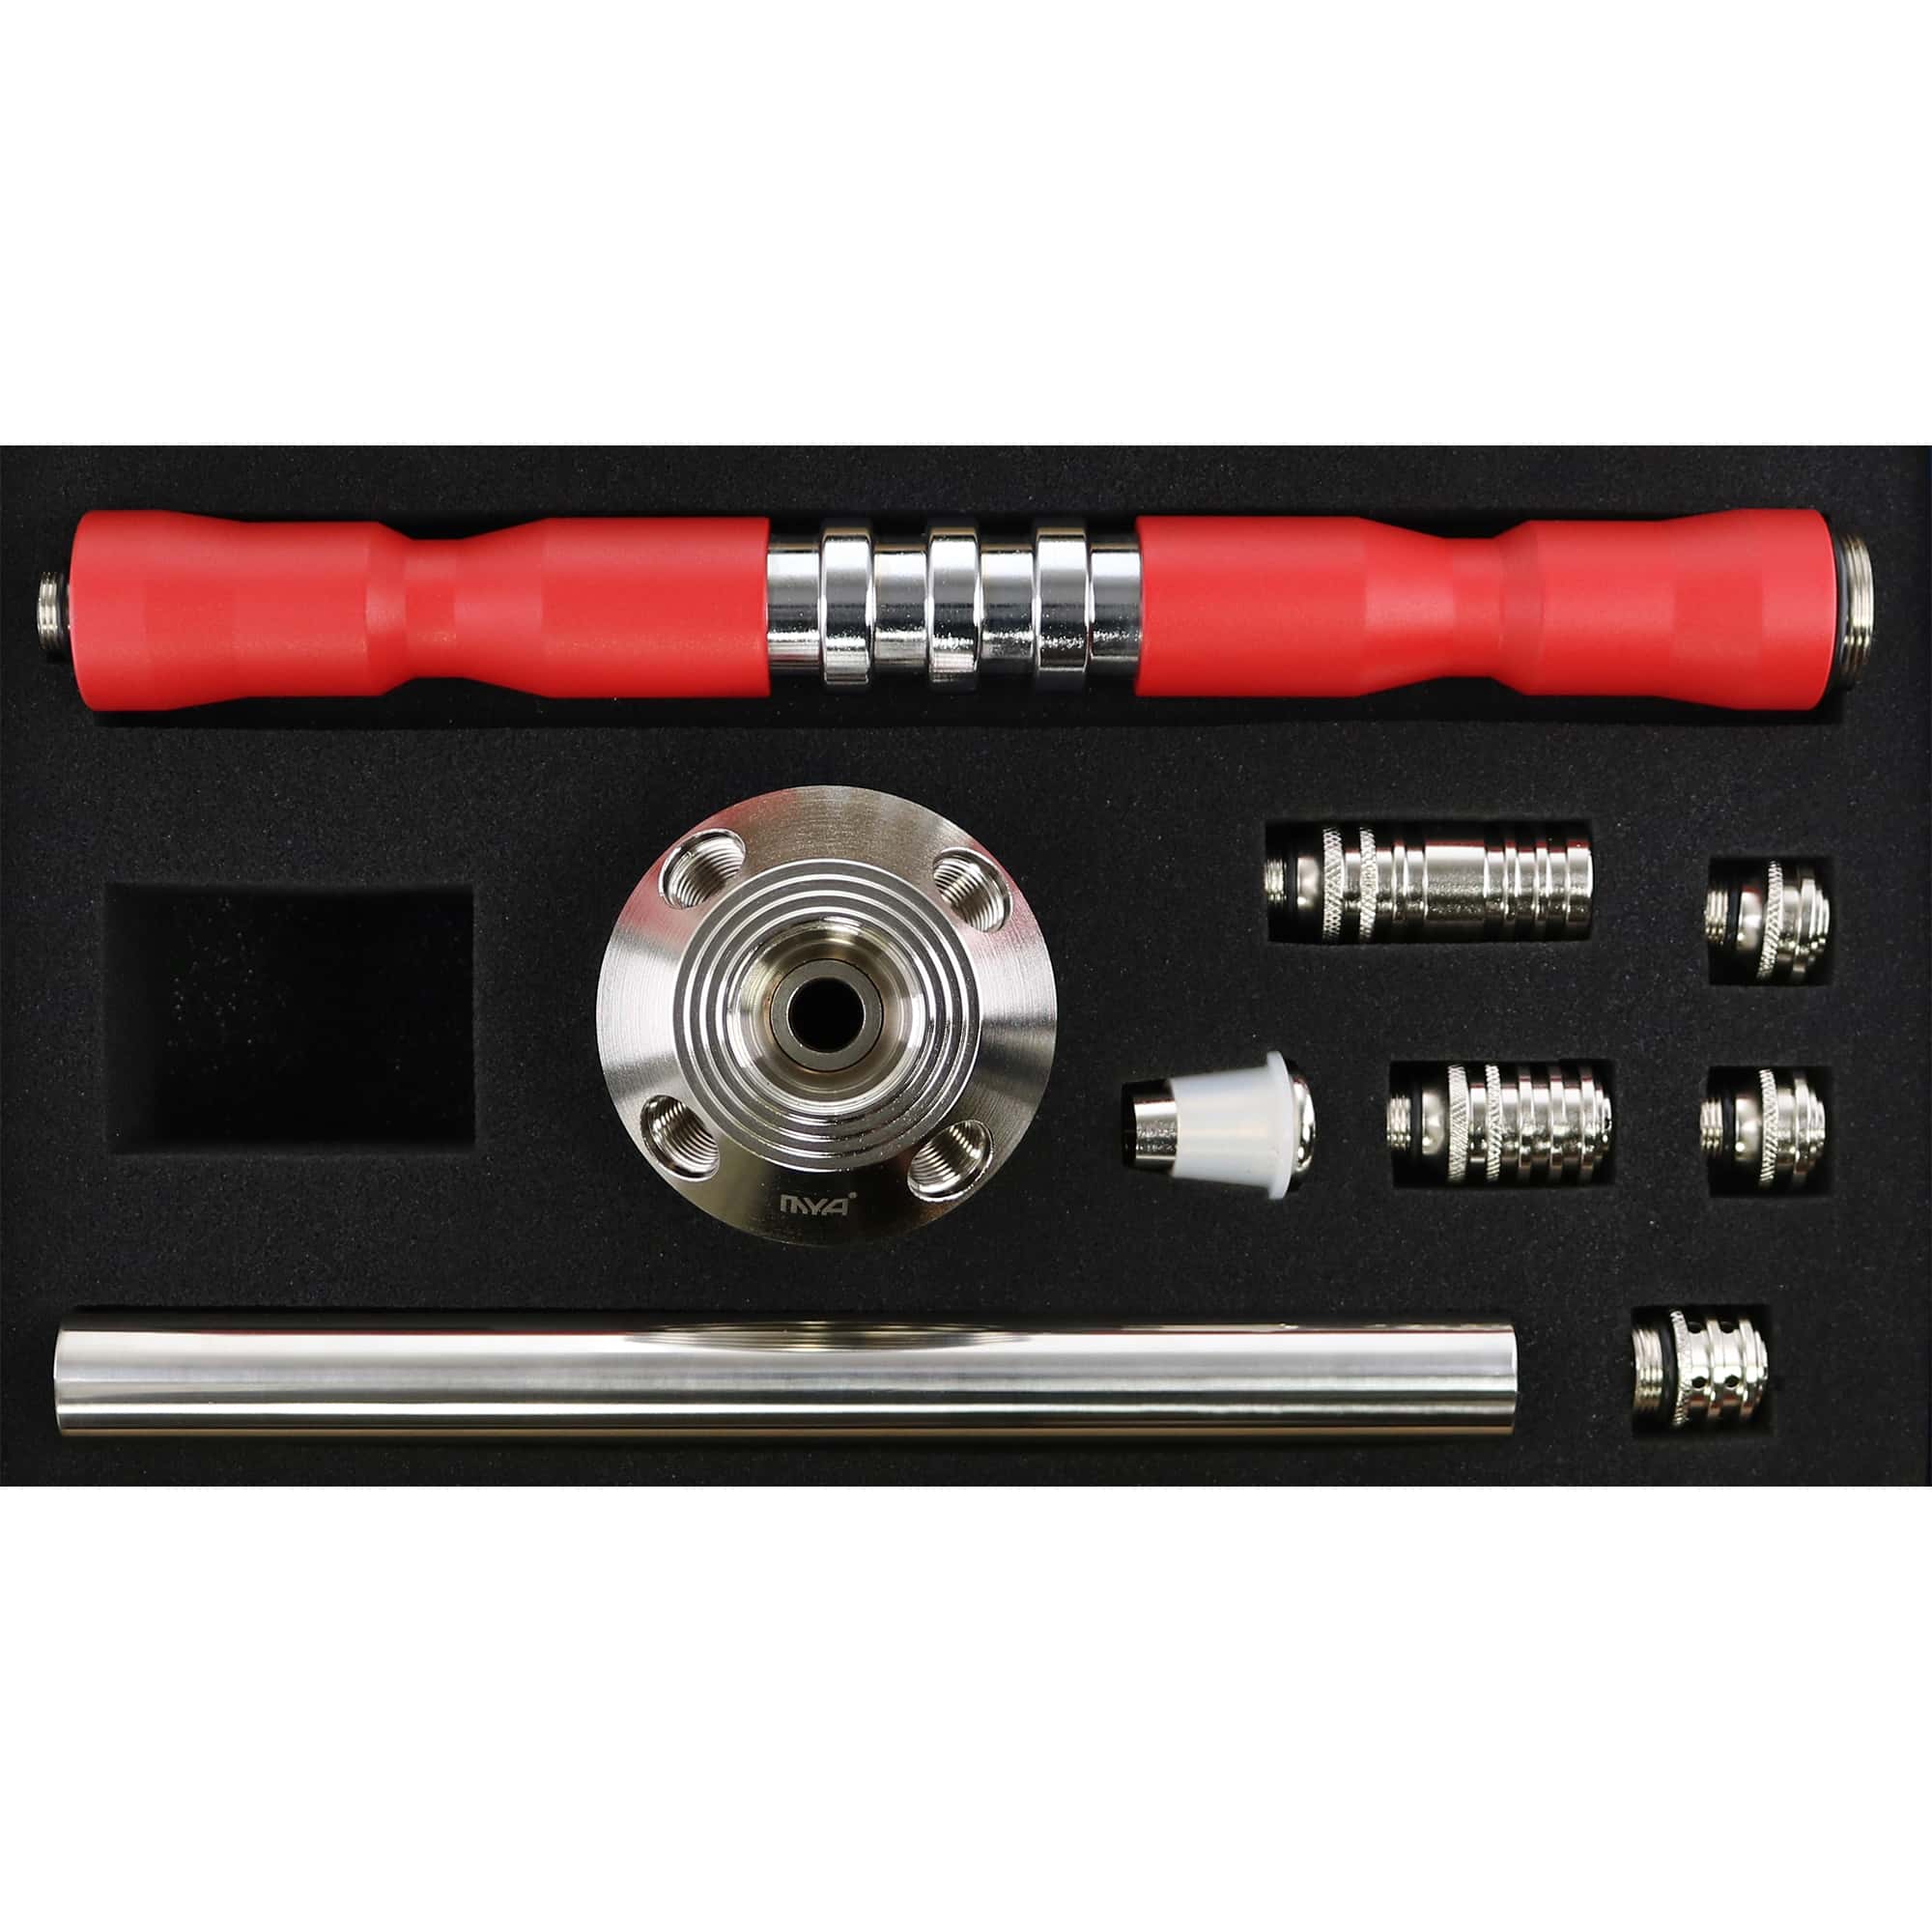 Red, Silver, Red MX Stem #stem color_Red/Silver/Red